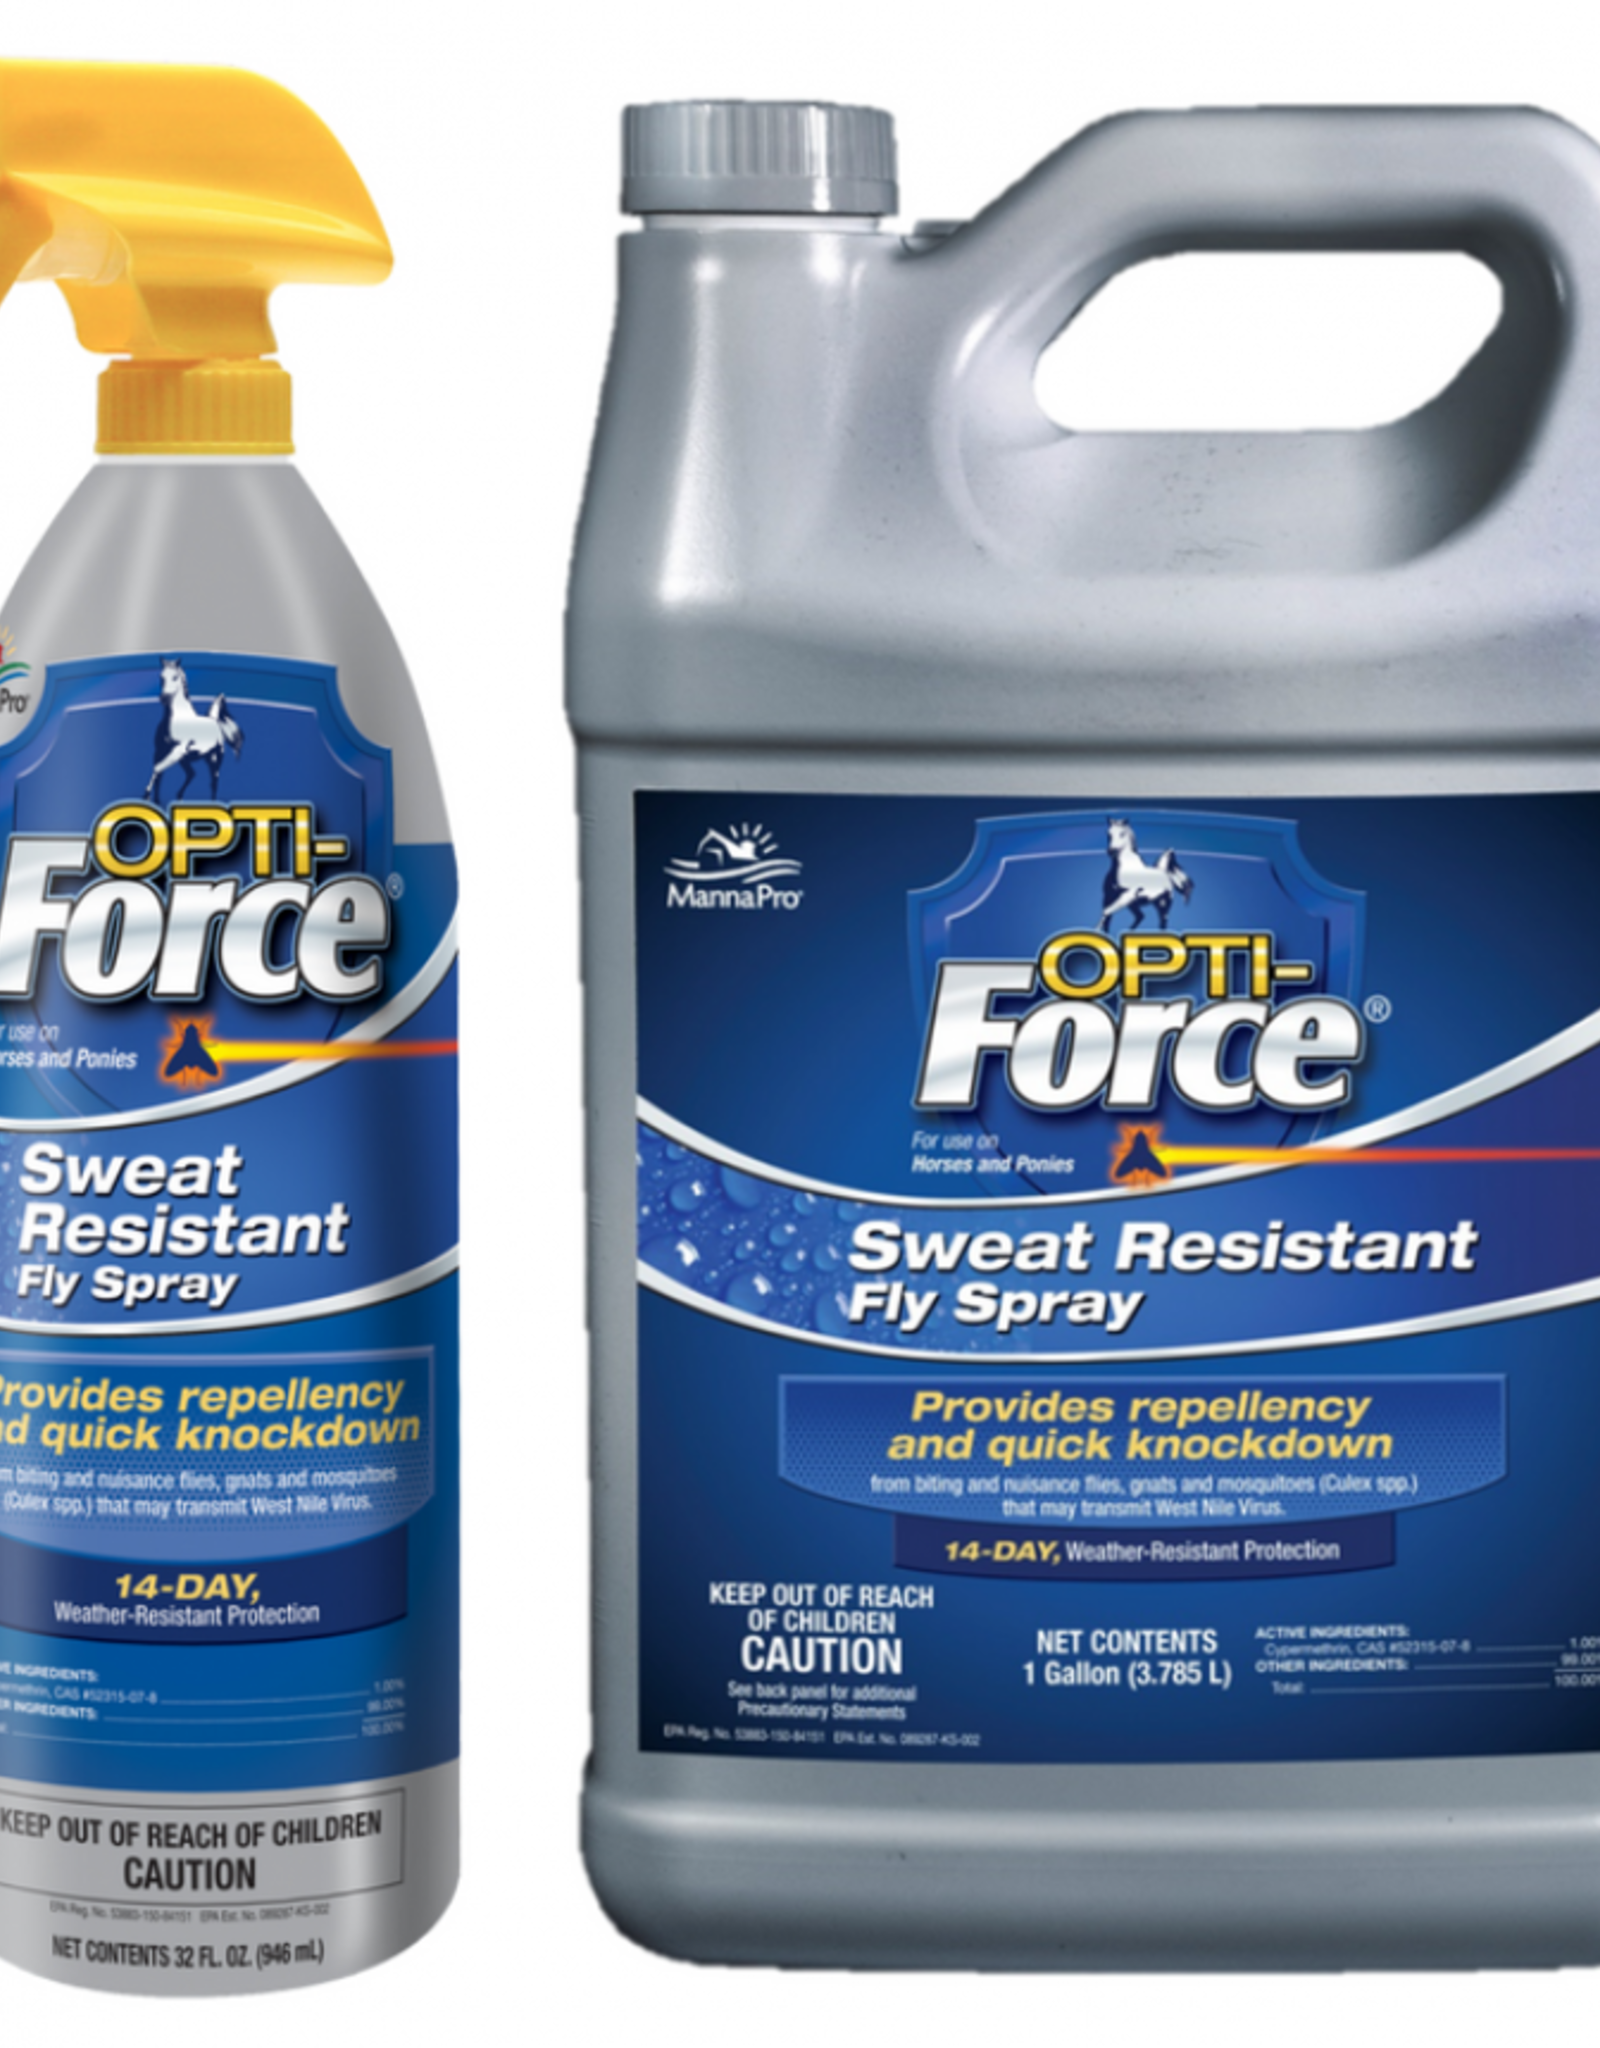 Opti-Force Sweat Resistant Fly Spray Liquid for Horses, 32 oz